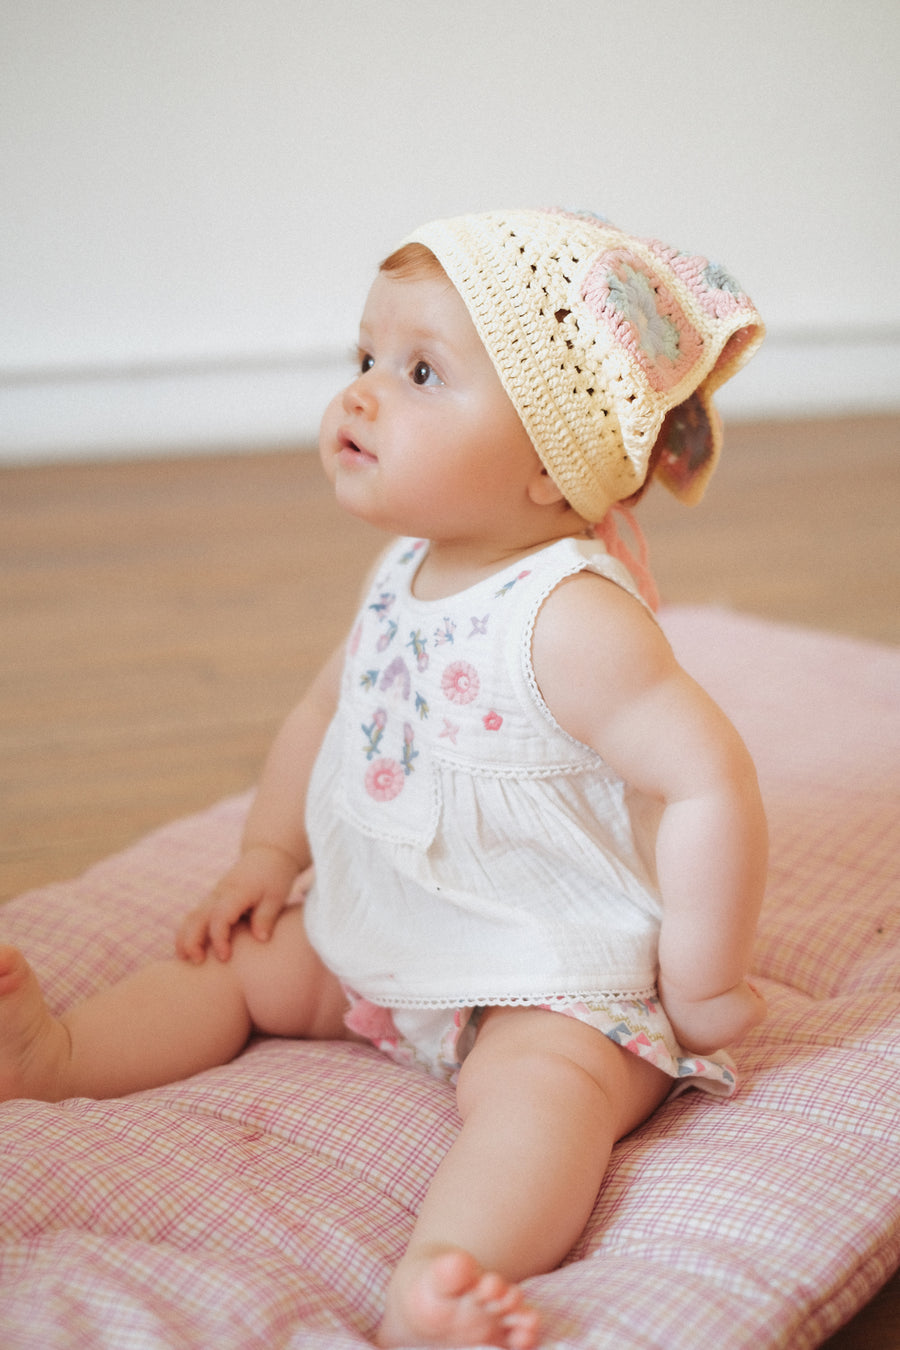 Solenia White Embroidered Baby Blouse